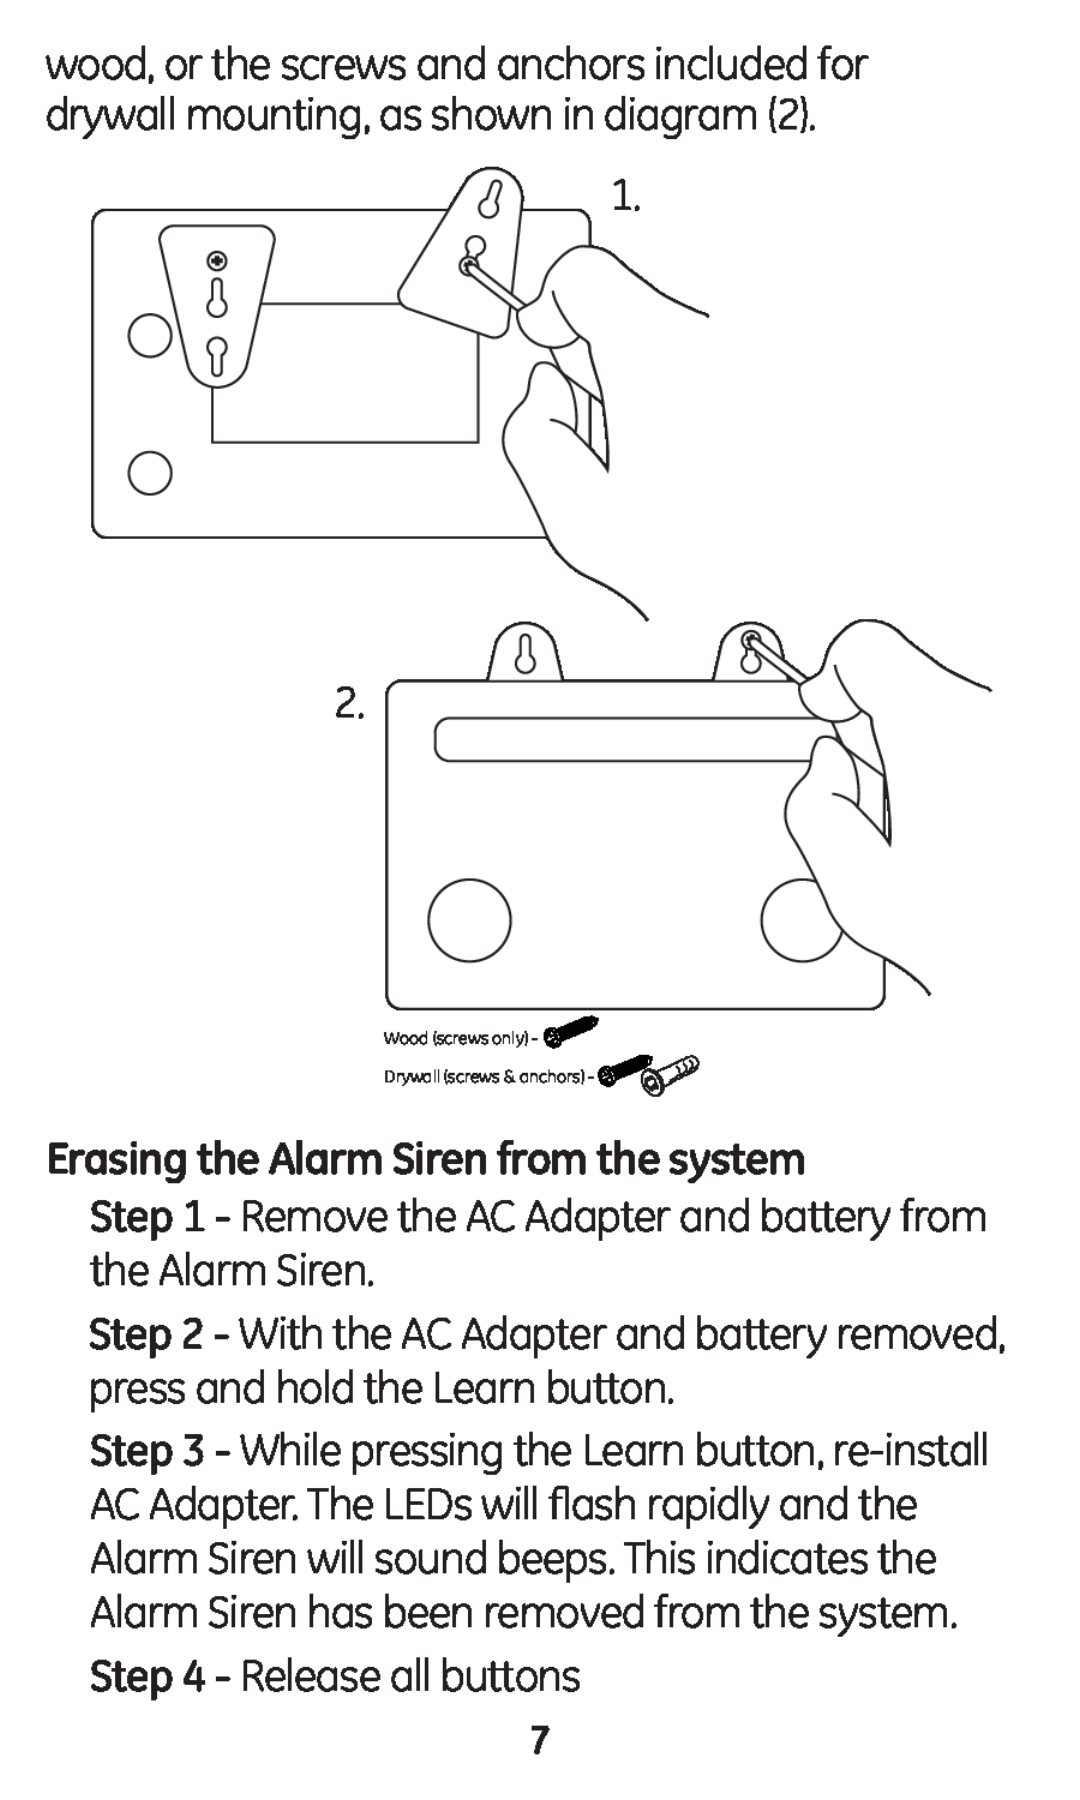 GE 45136 Erasing the Alarm Siren from the system, Release all buttons, Wood screws only Drywall screws & anchors 